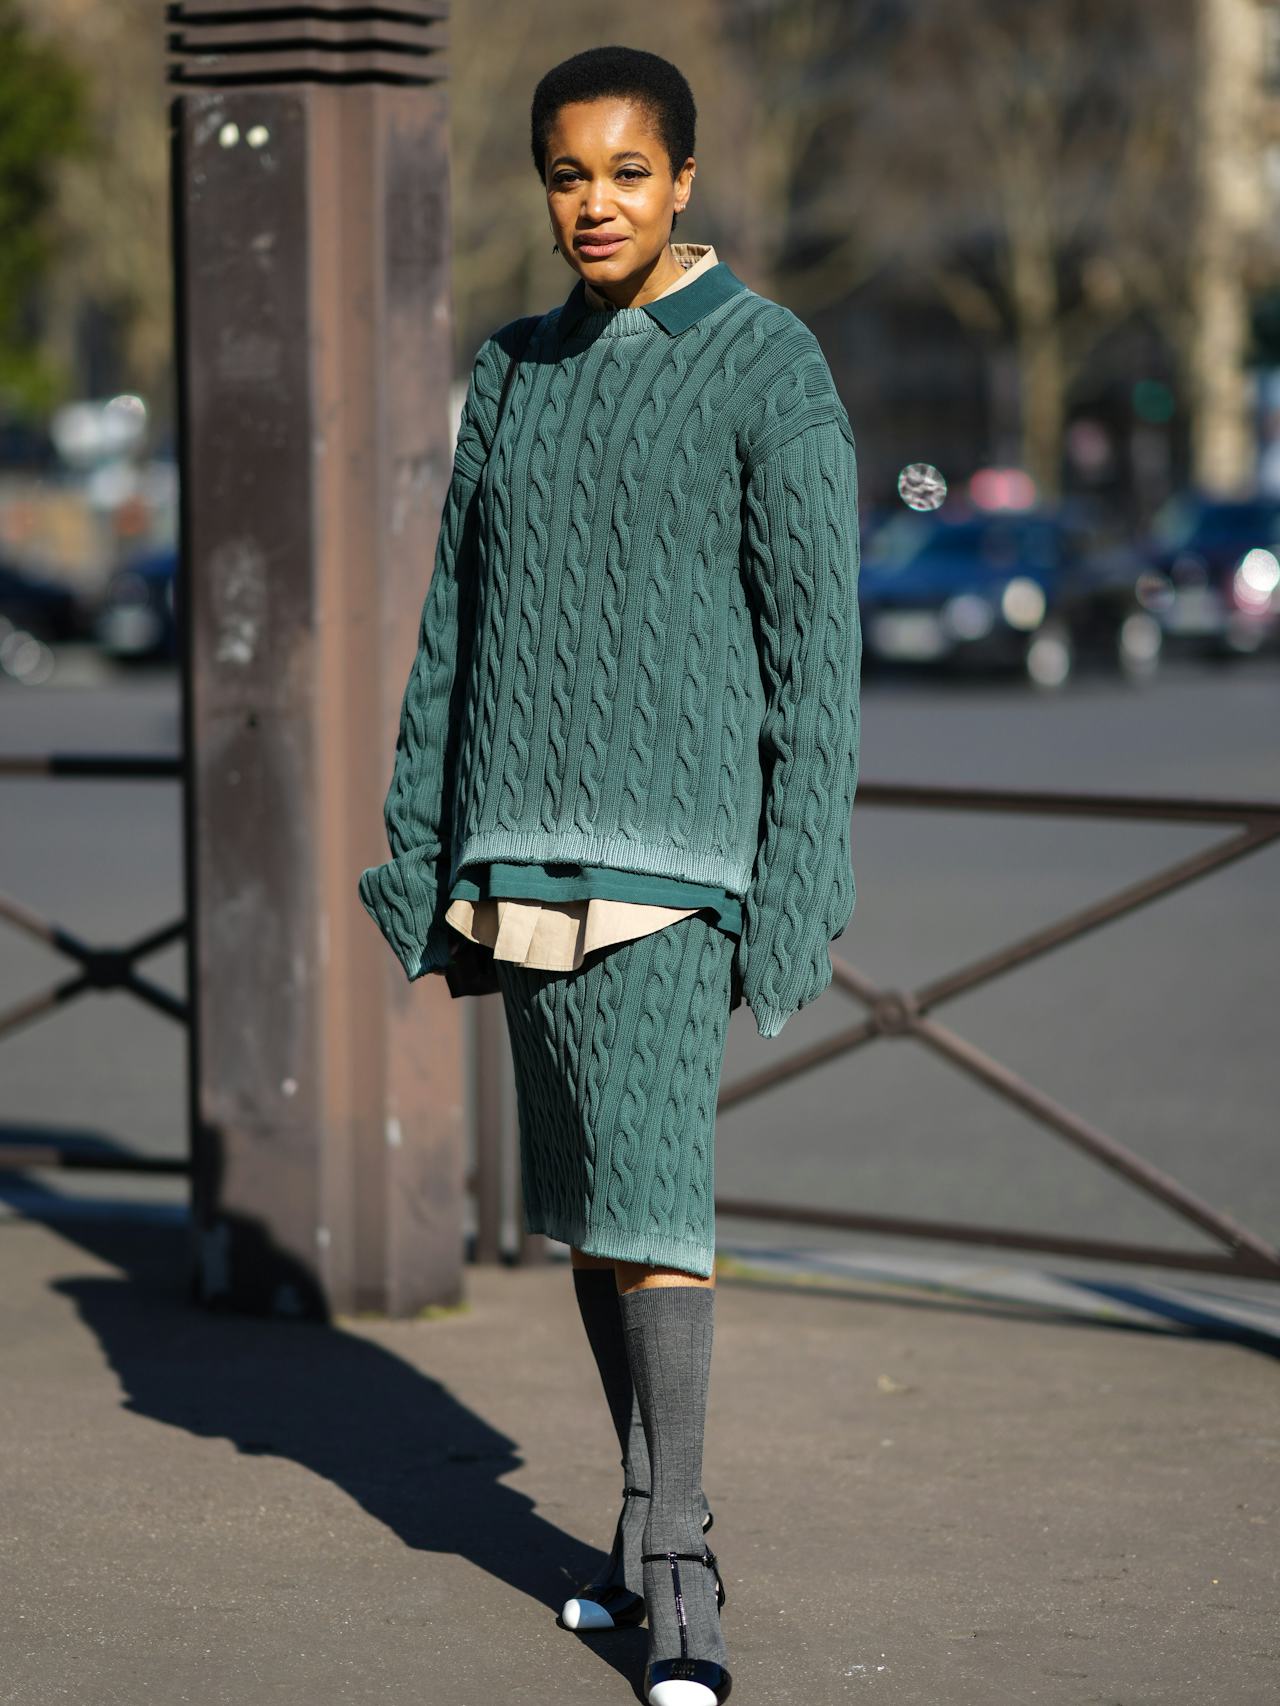 pot disappear Transplant How To Style Socks With Heels, Courtesy Of The Street Style Pros